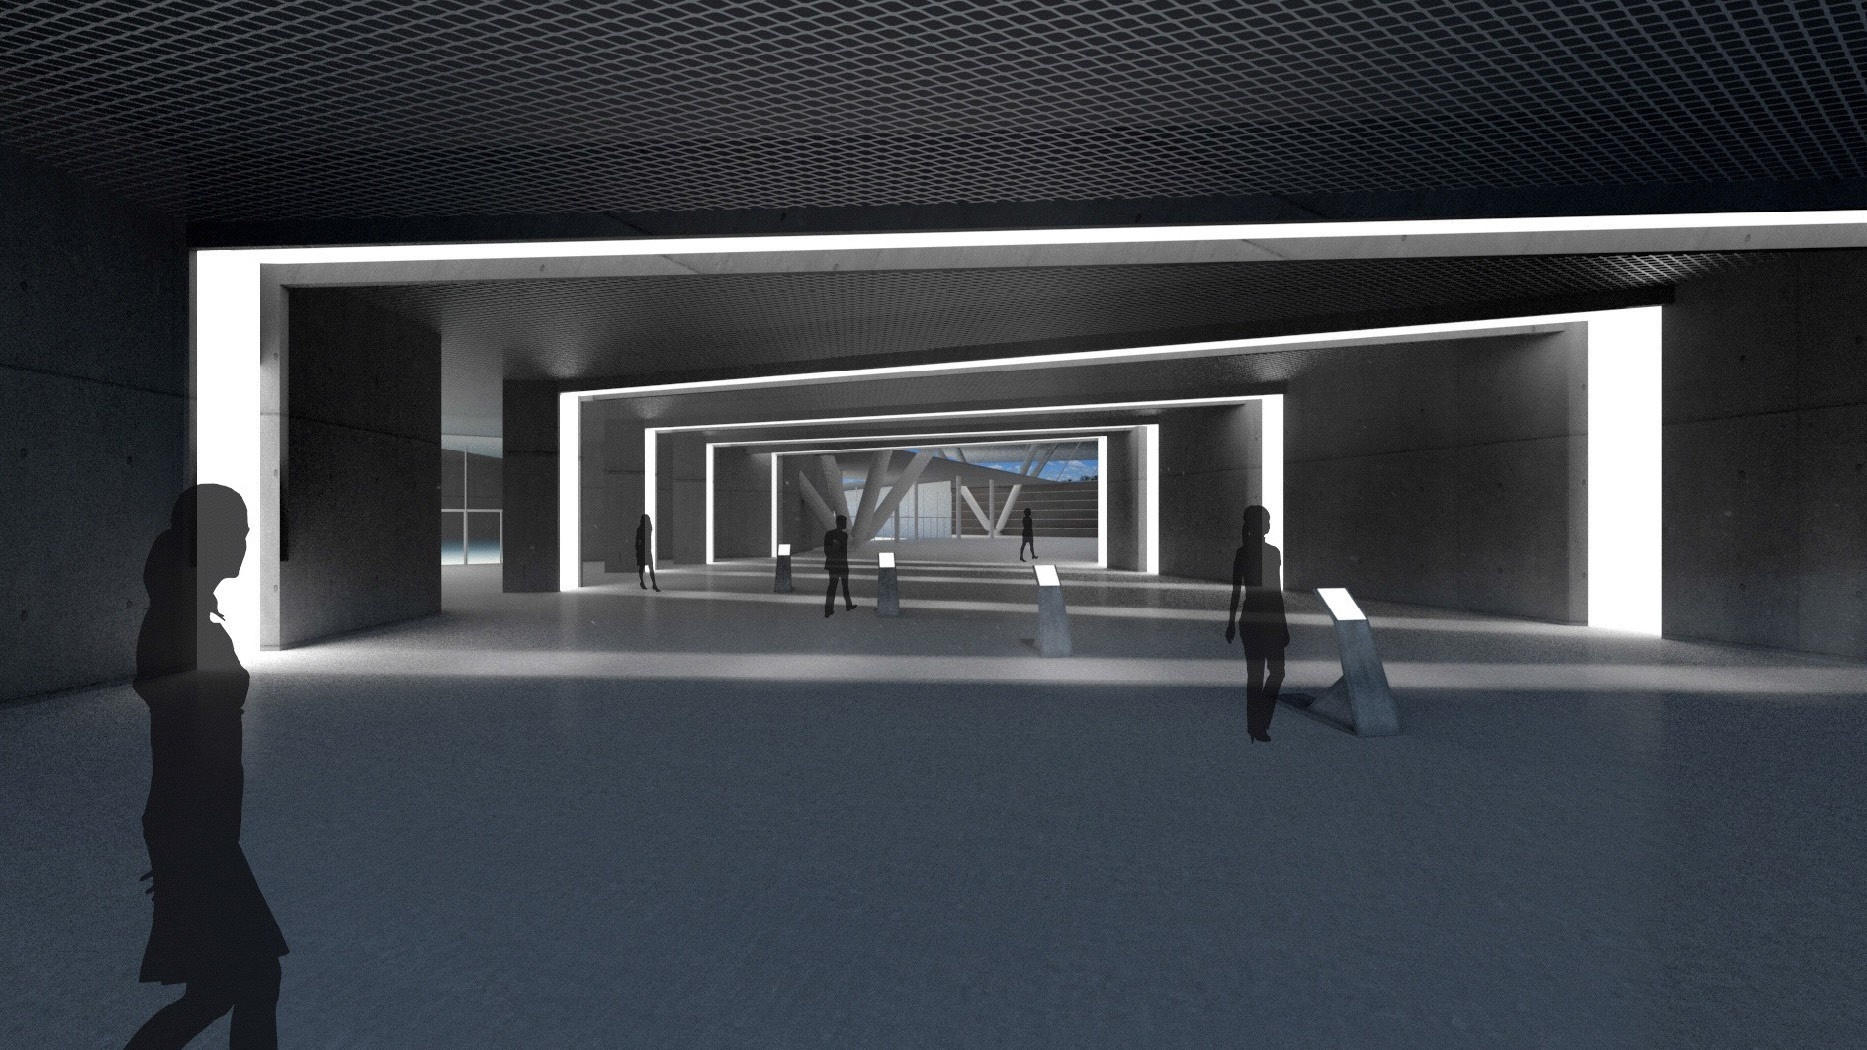 Render of Adidas Global HQ space with horizontal bands of light and visual opportunity